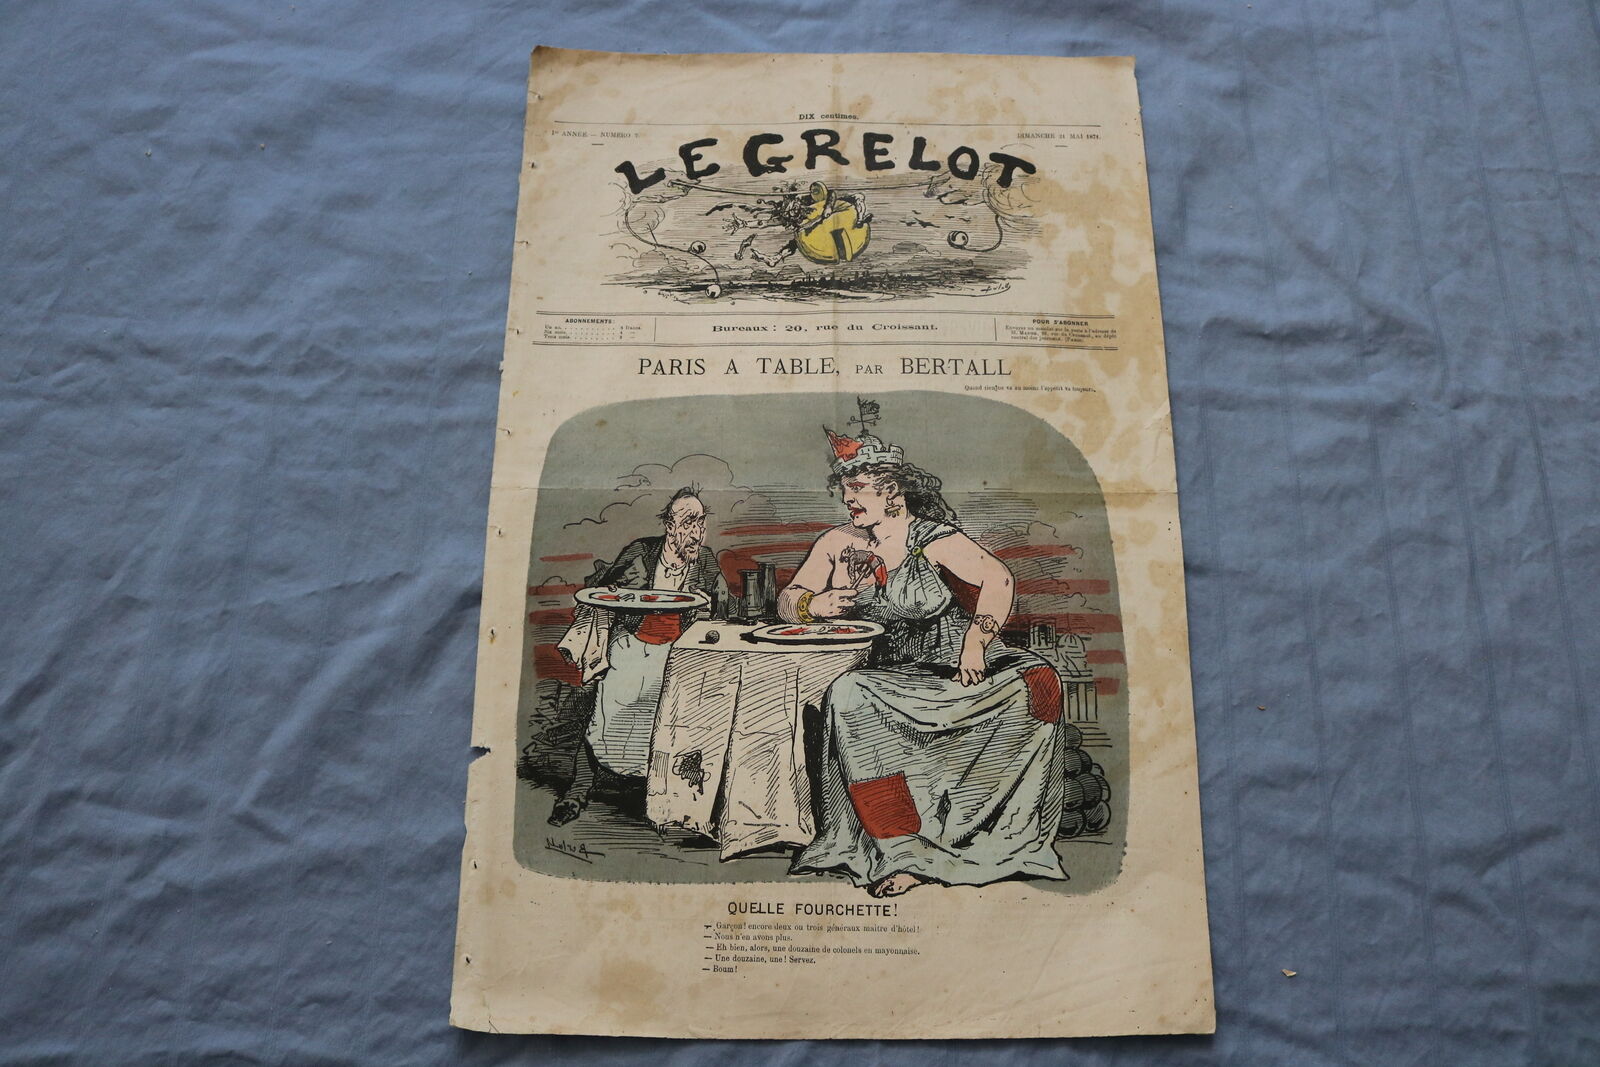 1871 MAY 21 LE GRELOT NEWSPAPER - PARIS A TABLE, PAR BERTALL - FRENCH - NP 8463